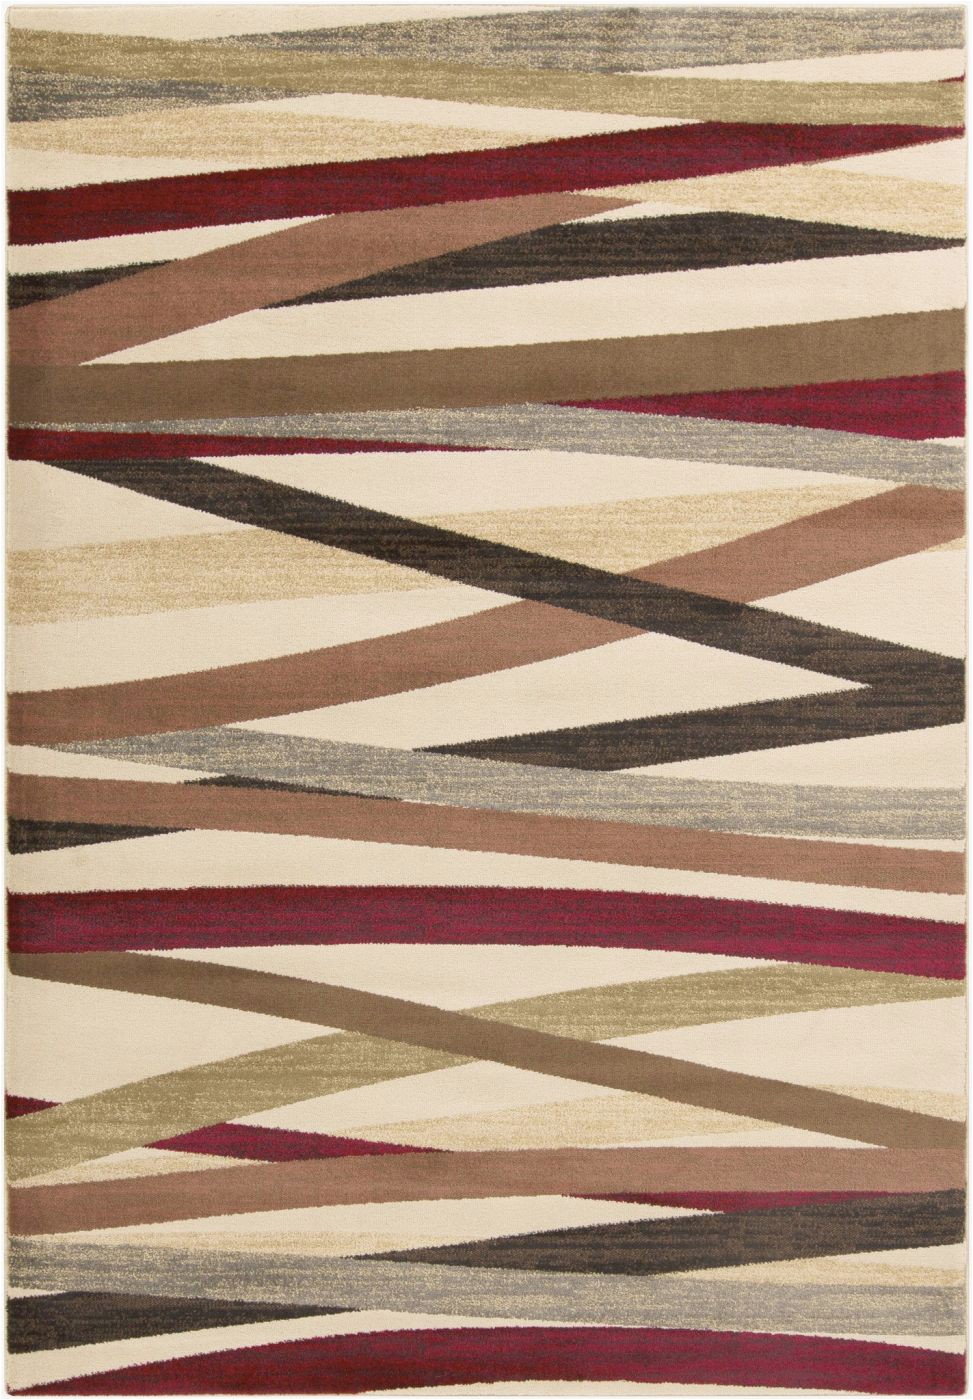 Red Brown Black area Rugs Surya Blowout Sale Up to Off Rly5058 1013 Riley area Rug Red Brown Only Ly $525 60 at Contemporary Furniture Warehouse